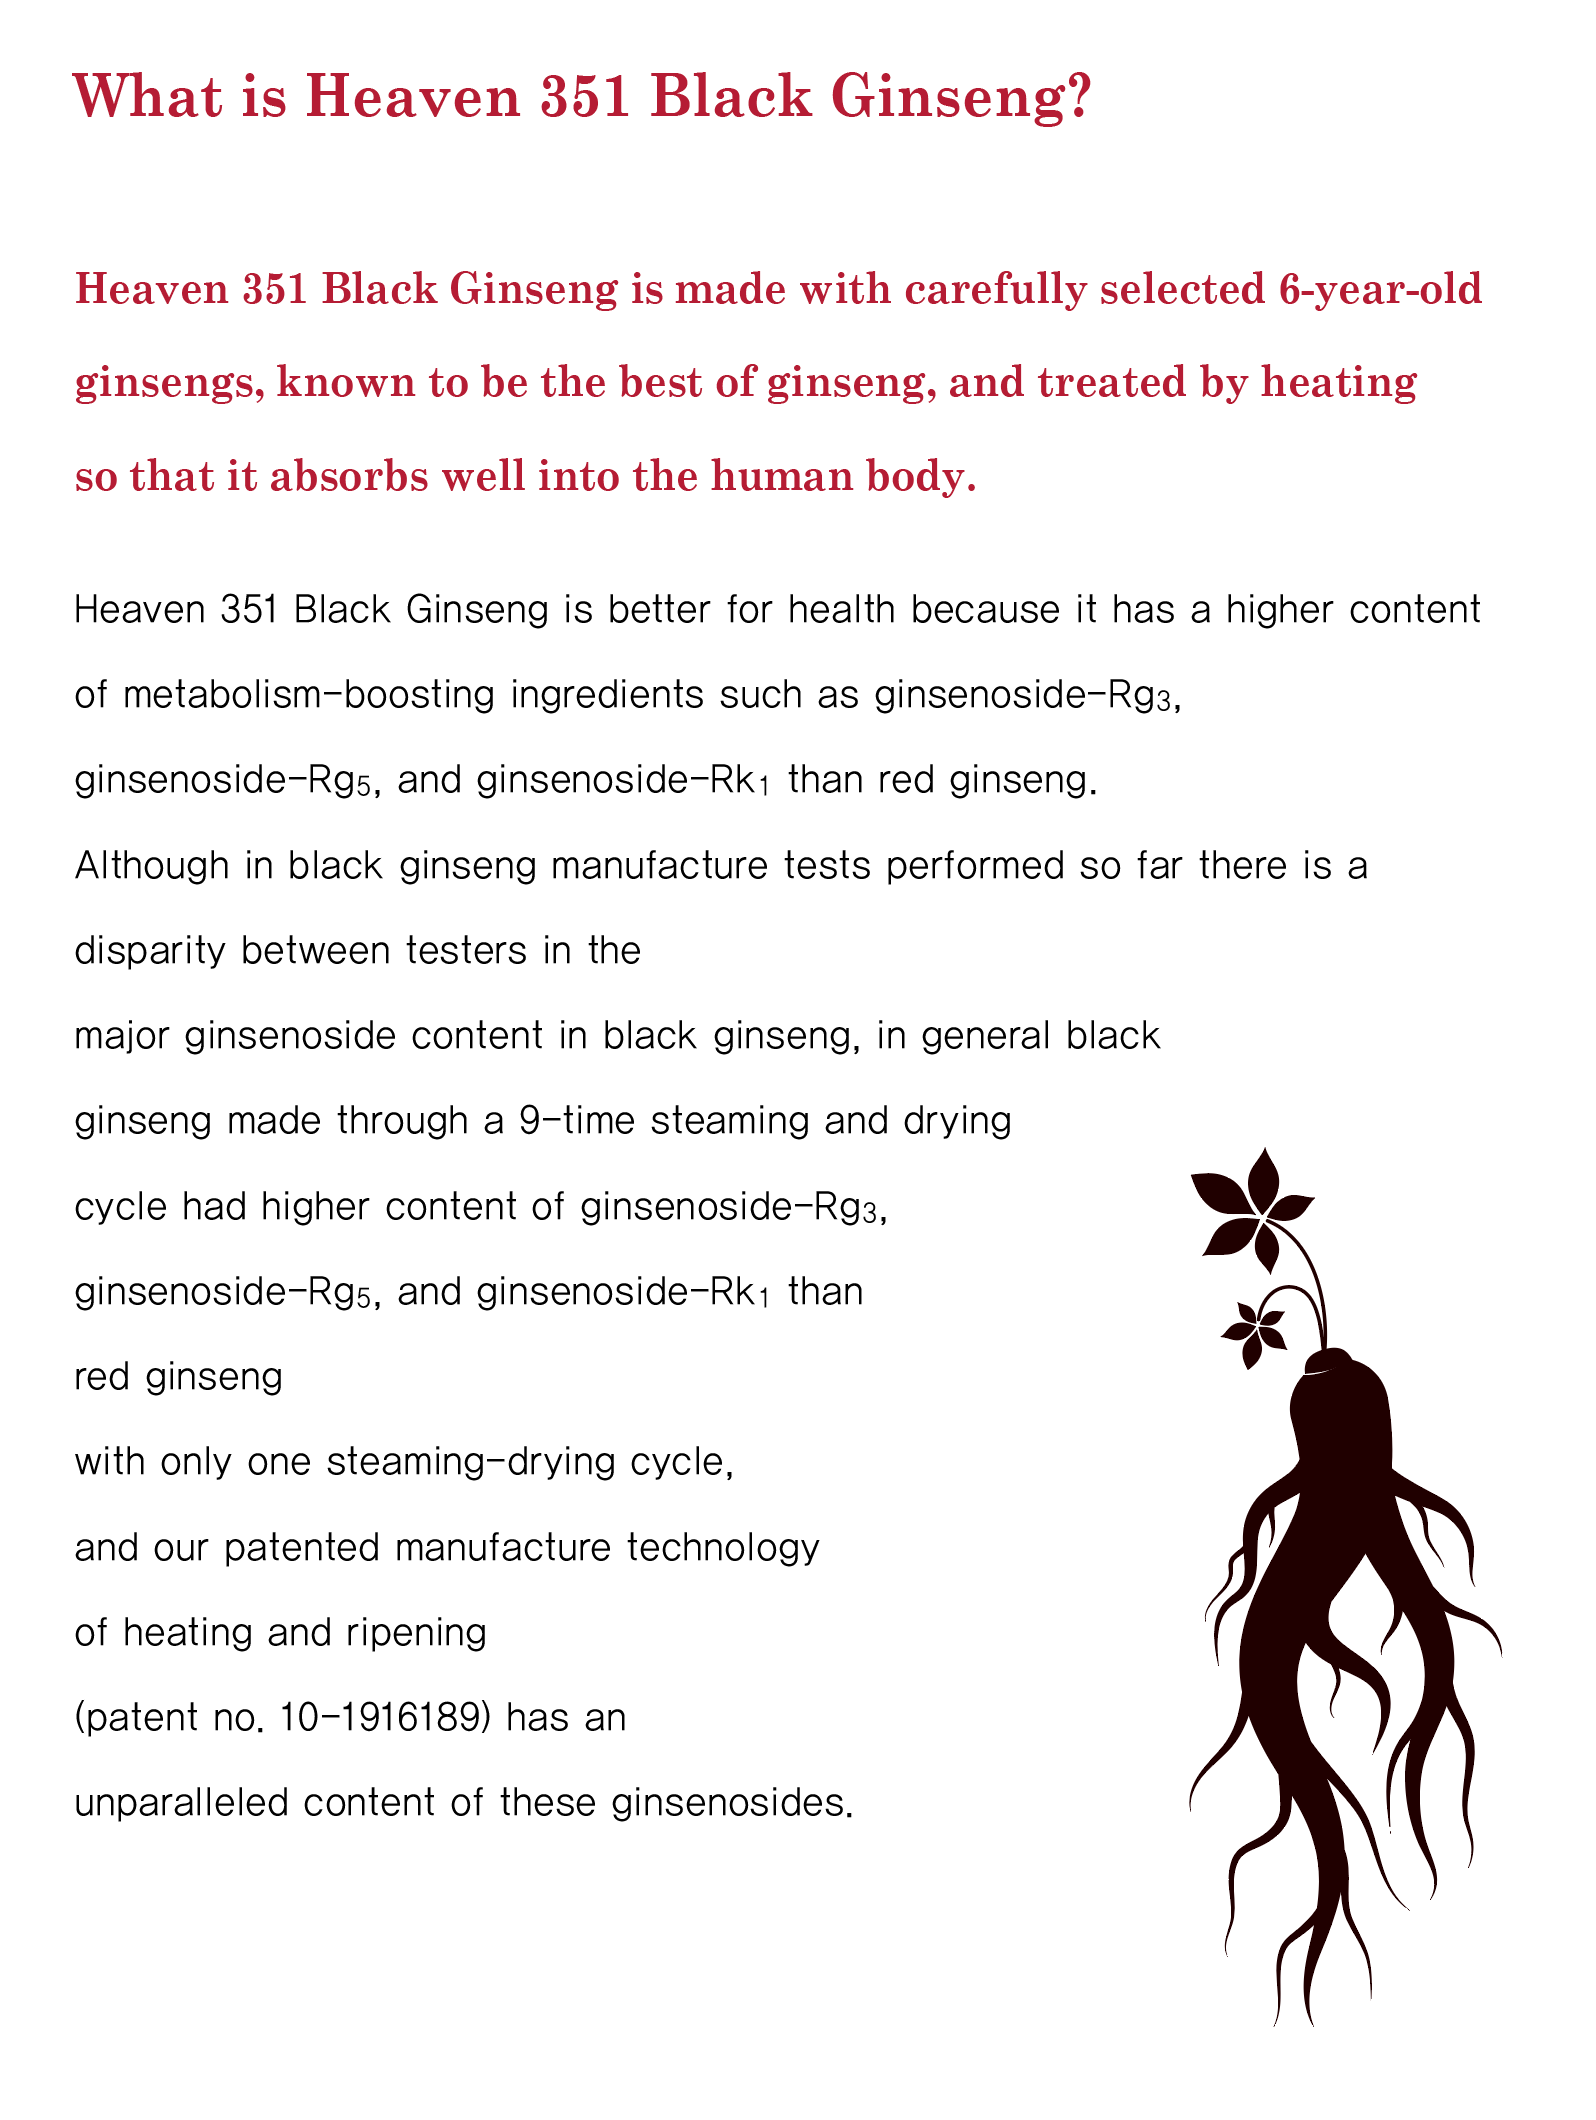 Heaven Grade 351 Black Ginseng Rootlet Roots 15 Pieces Premium Korean 6 Years Old Health Supplements Foods Gifts